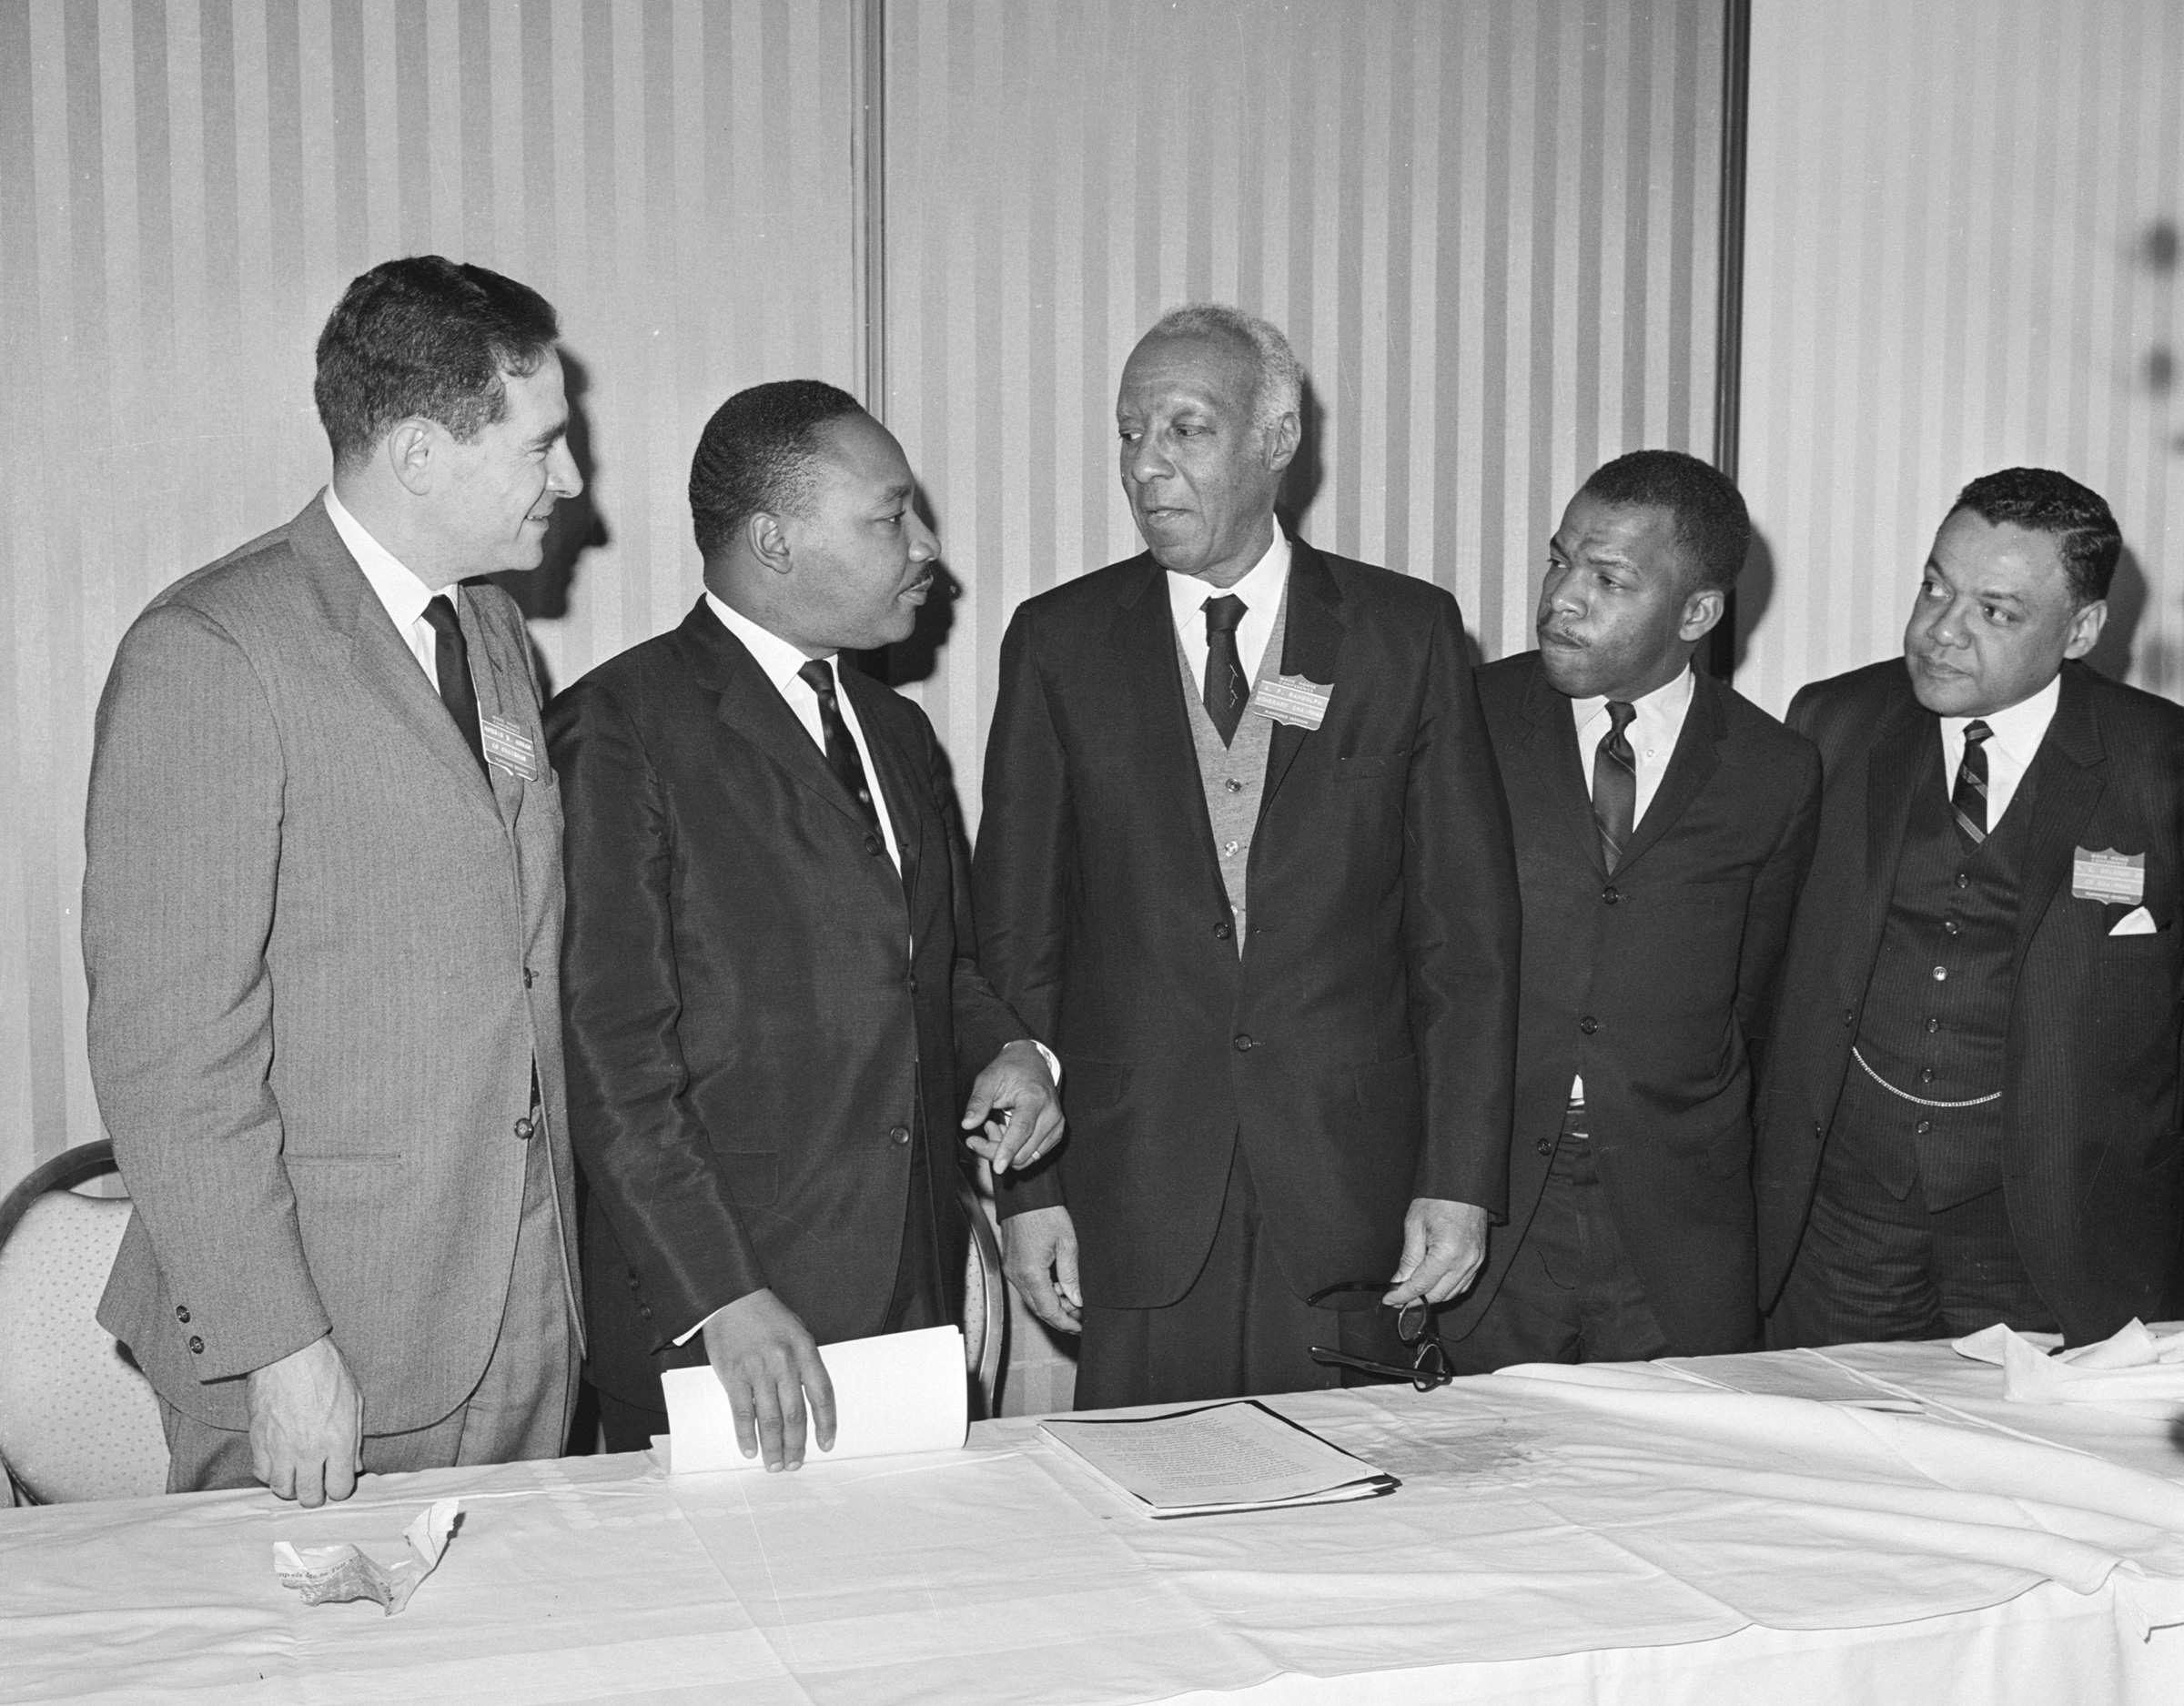 From left, Morris B. Abram, Rev. Martin Luther King, Jr., A. Philip Randolph, John Lewis and William T. Coleman take part the White House Conference on Civil Rights with a call for $100 billion "Freedom Budget". (Bettmann Archive/Getty Images)